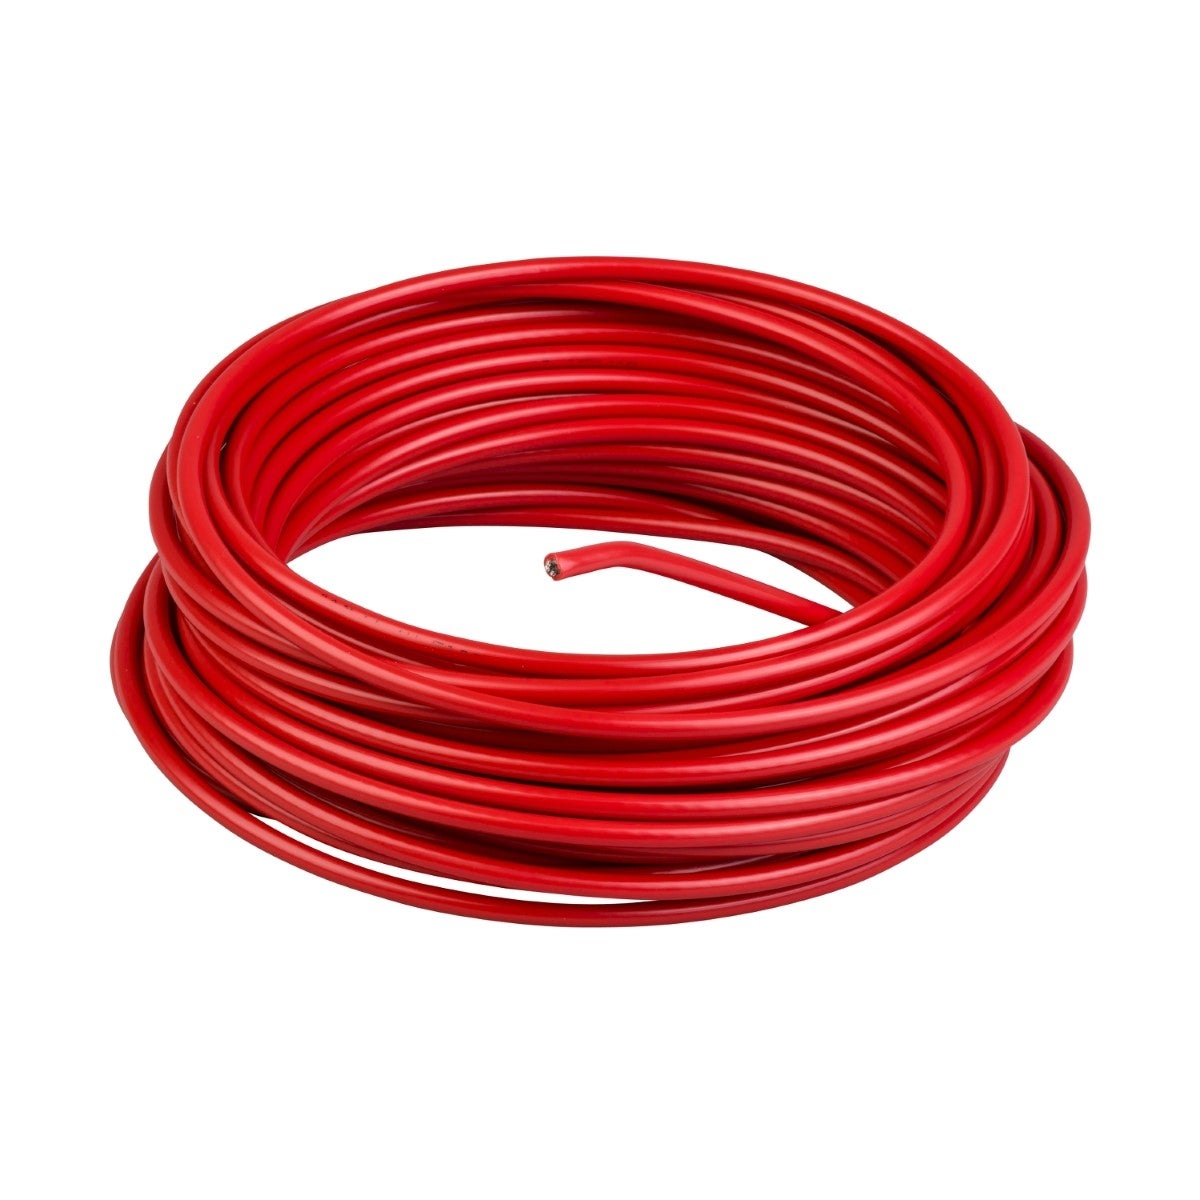 Telemecanique Emergency stop rope pull switches XY2C, red galvanised cable, Ø 3.2 mm, L 10.5 m, for XY2C